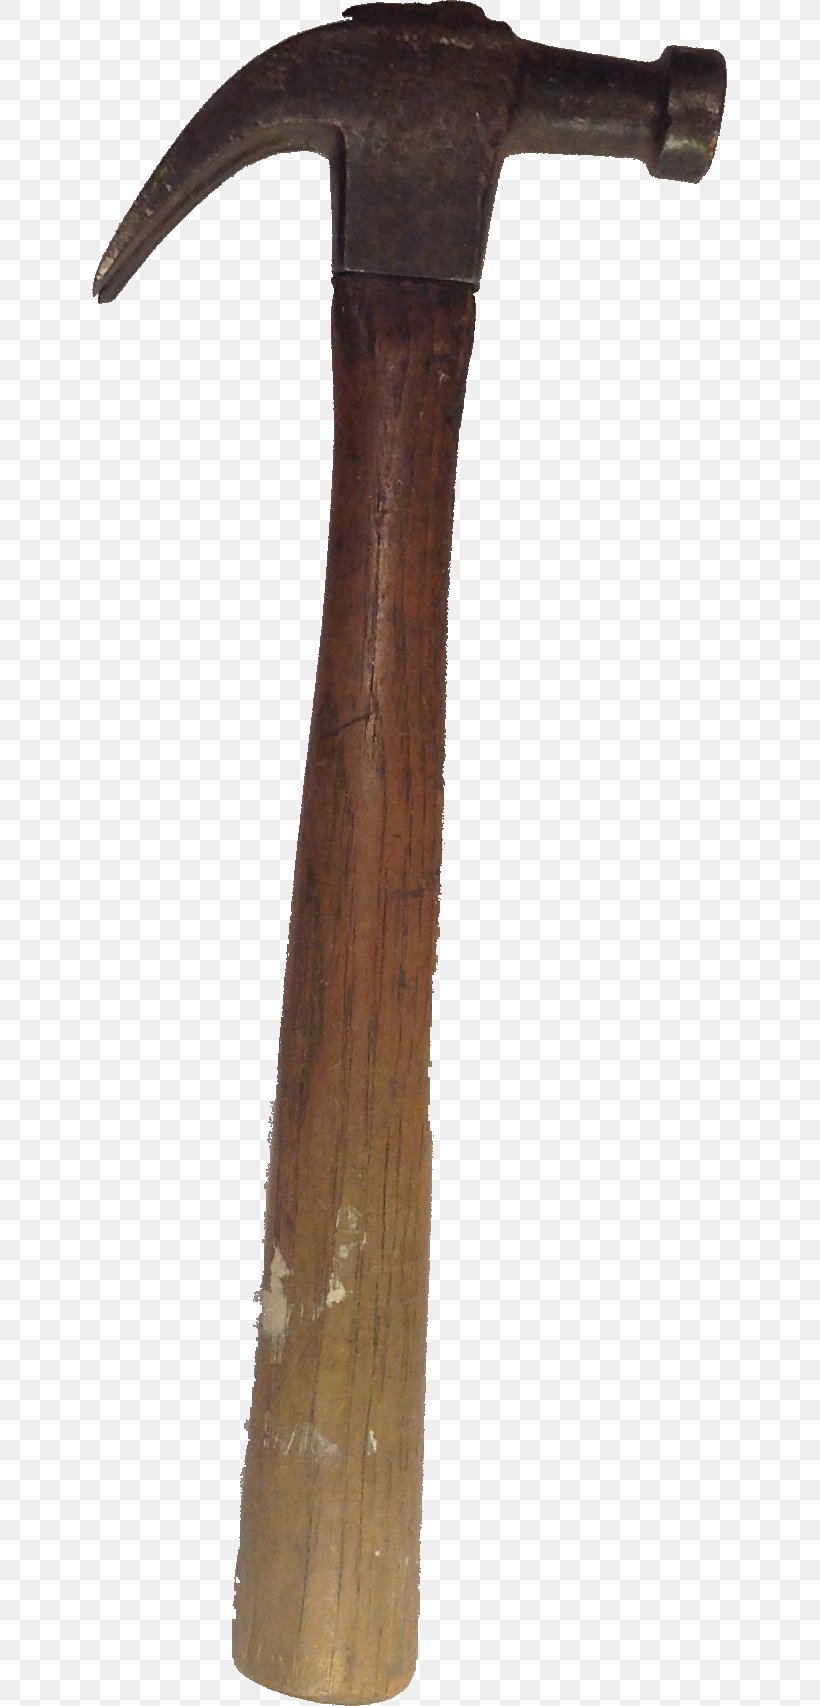 Pickaxe Splitting Maul Antique Tool Hammer, PNG, 635x1706px, Pickaxe, Antique, Antique Tool, Hammer, Splitting Maul Download Free